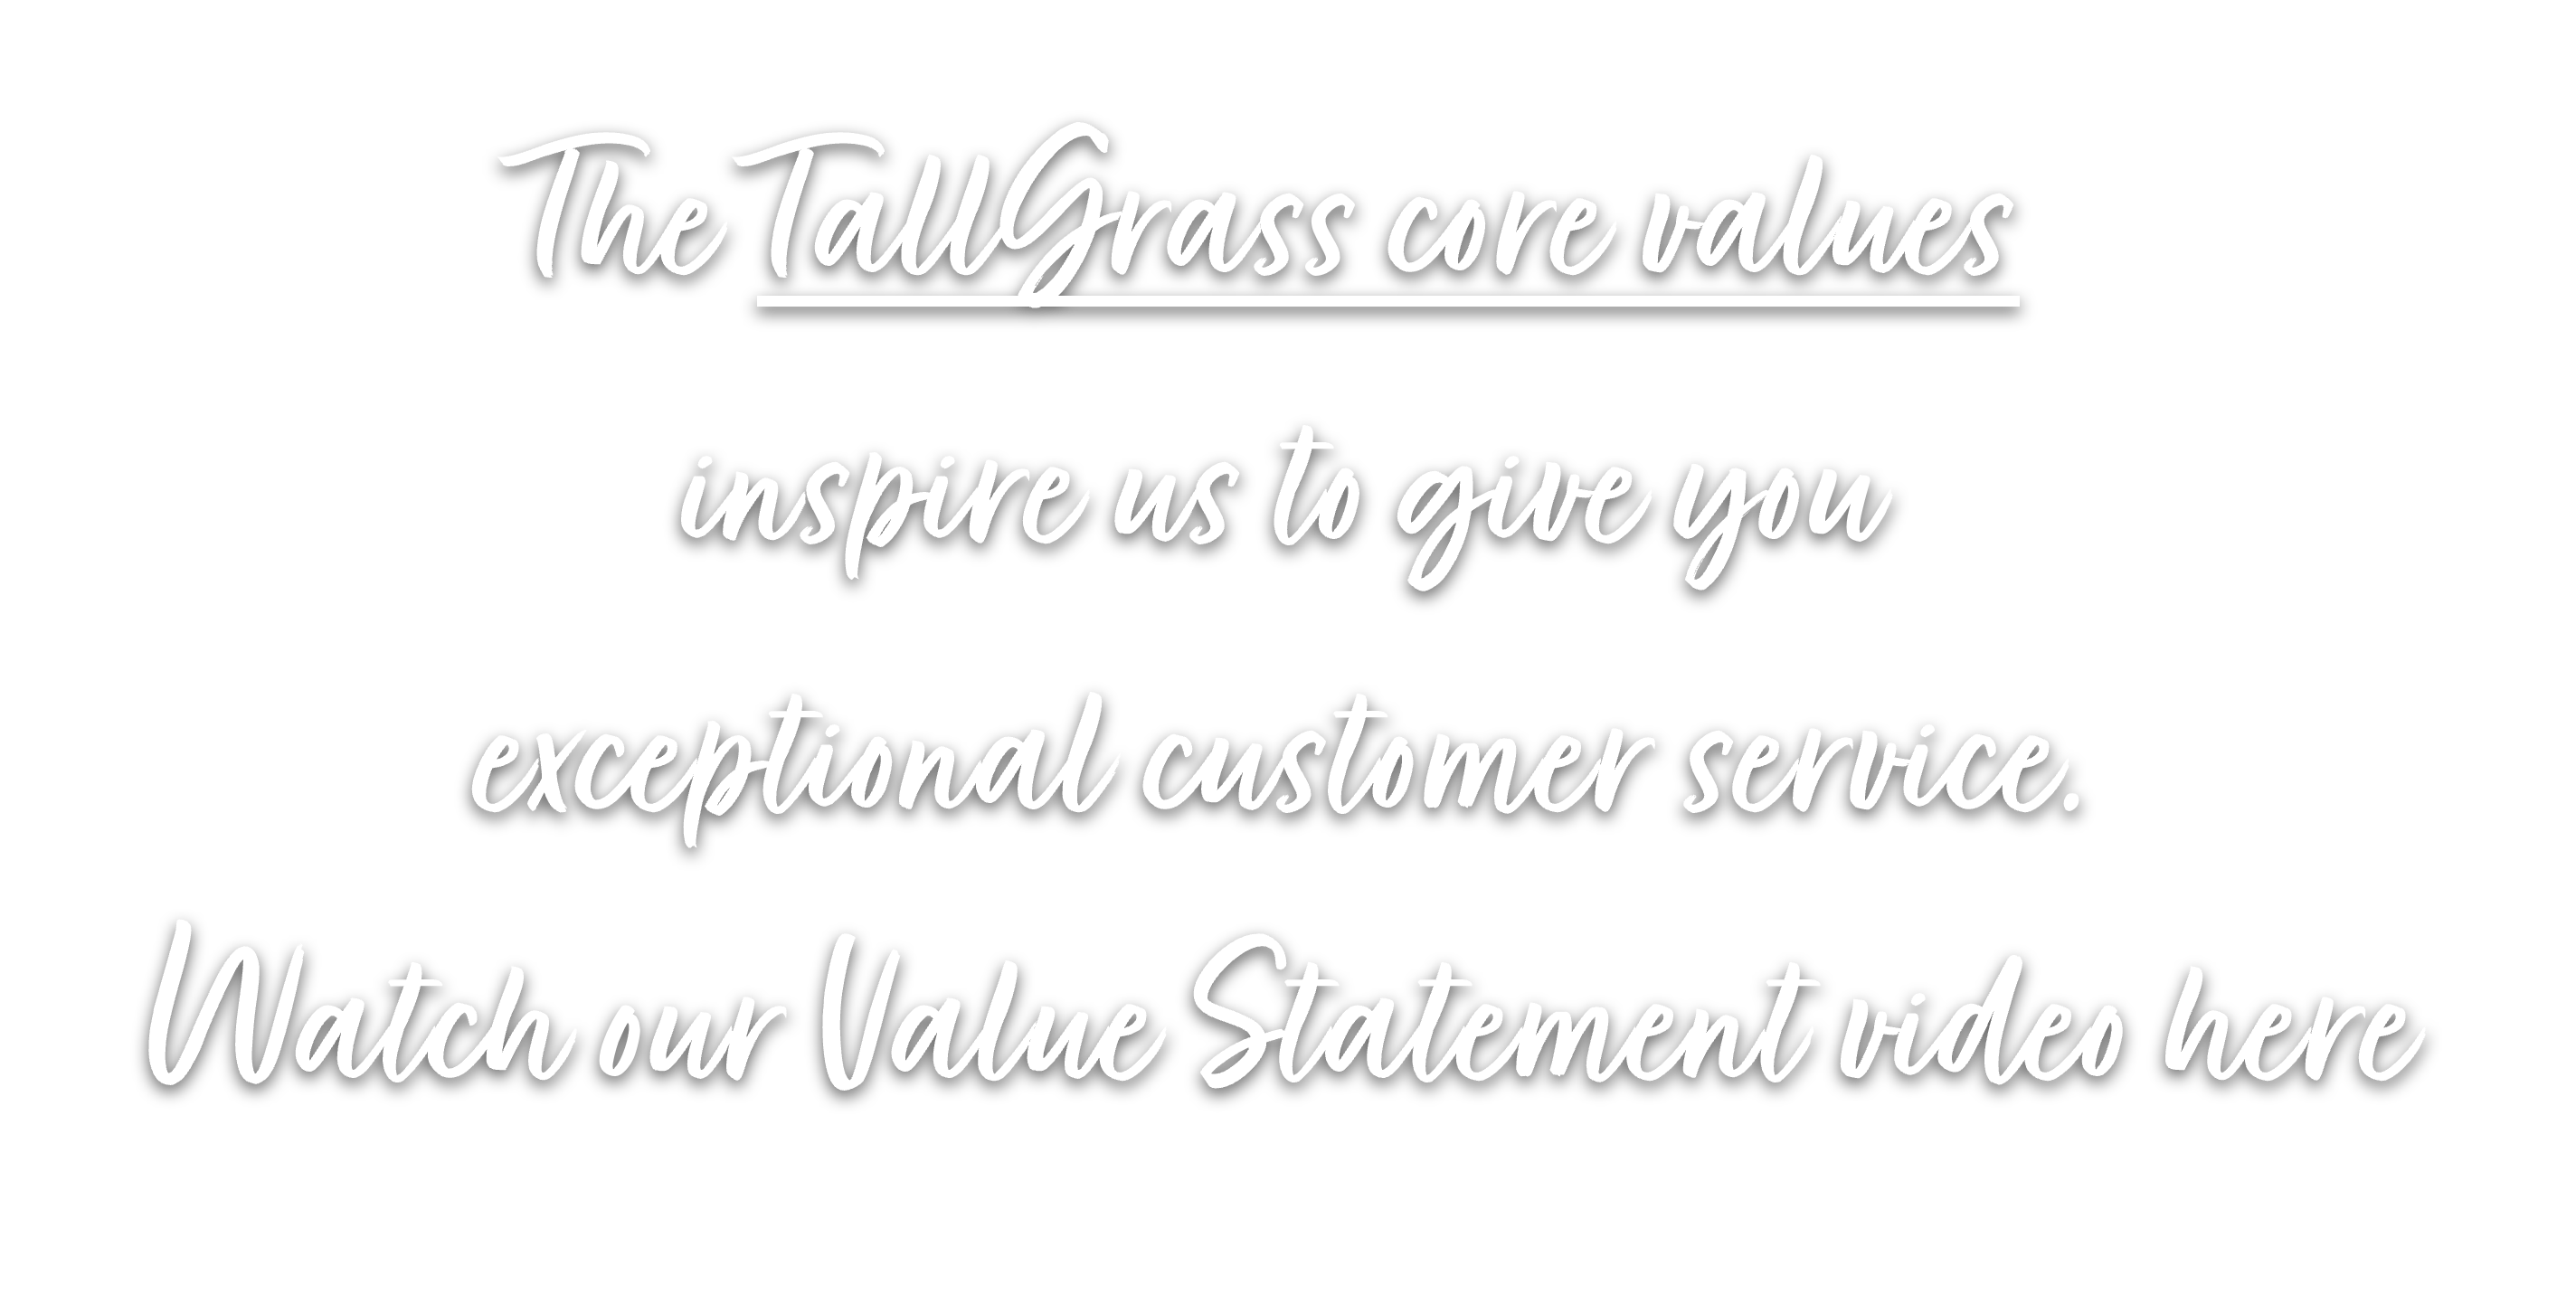 The TallGlass core values inspire us to give you exceptional customer service.